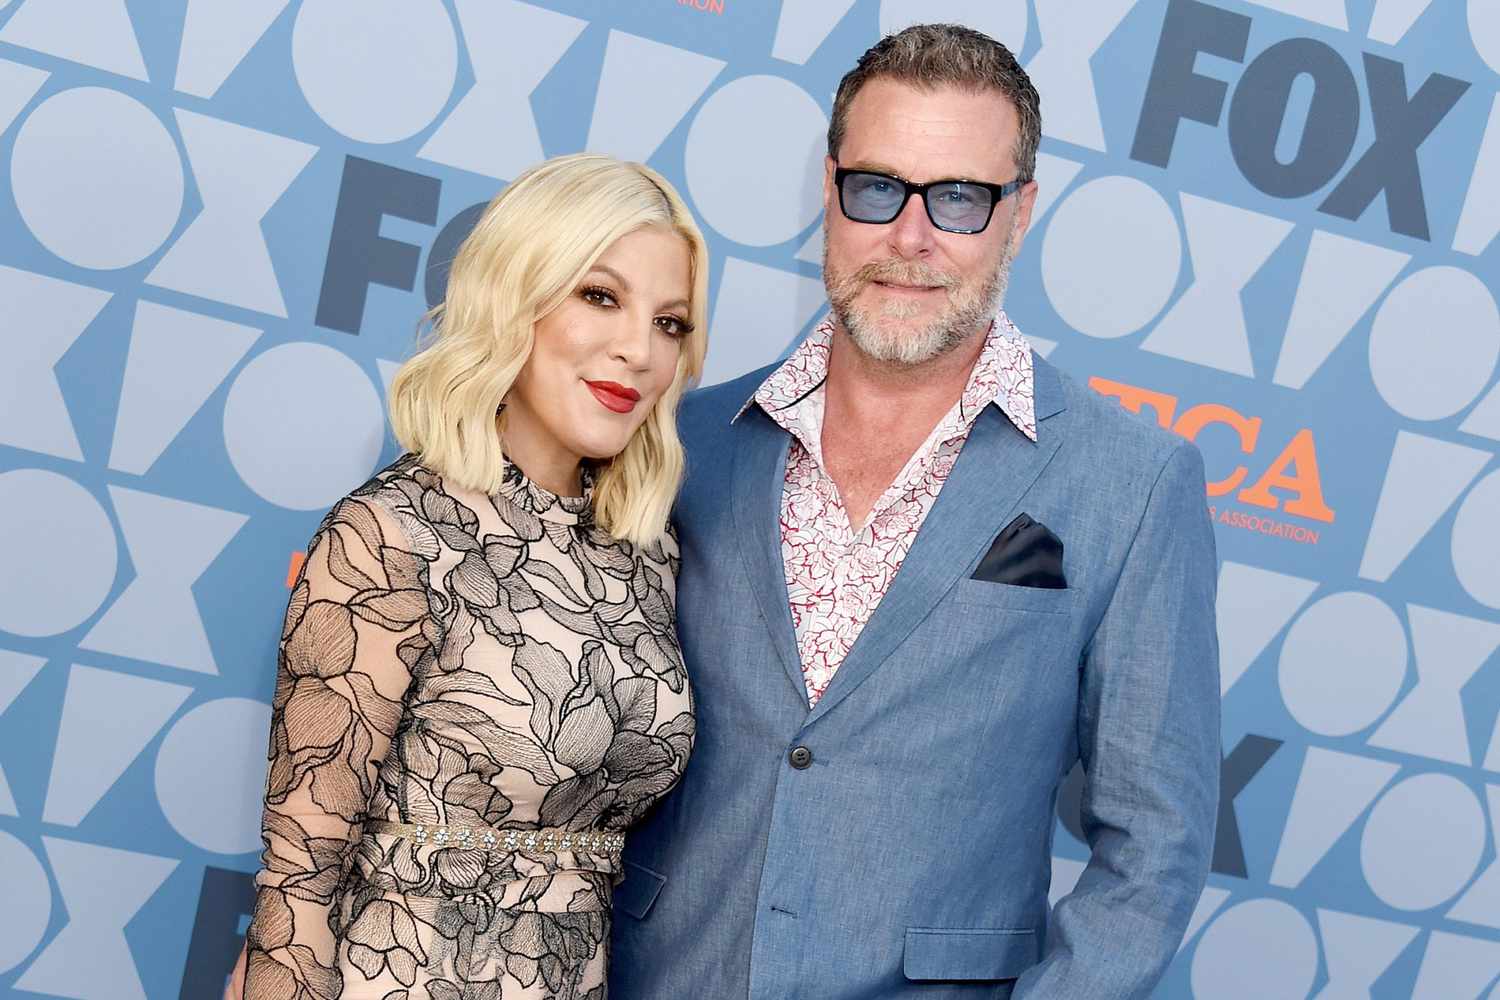 Tori Spelling Poses with the Kids as Husband Dean McDermott Says He's 'Sick as a Dog with Pneumonia'